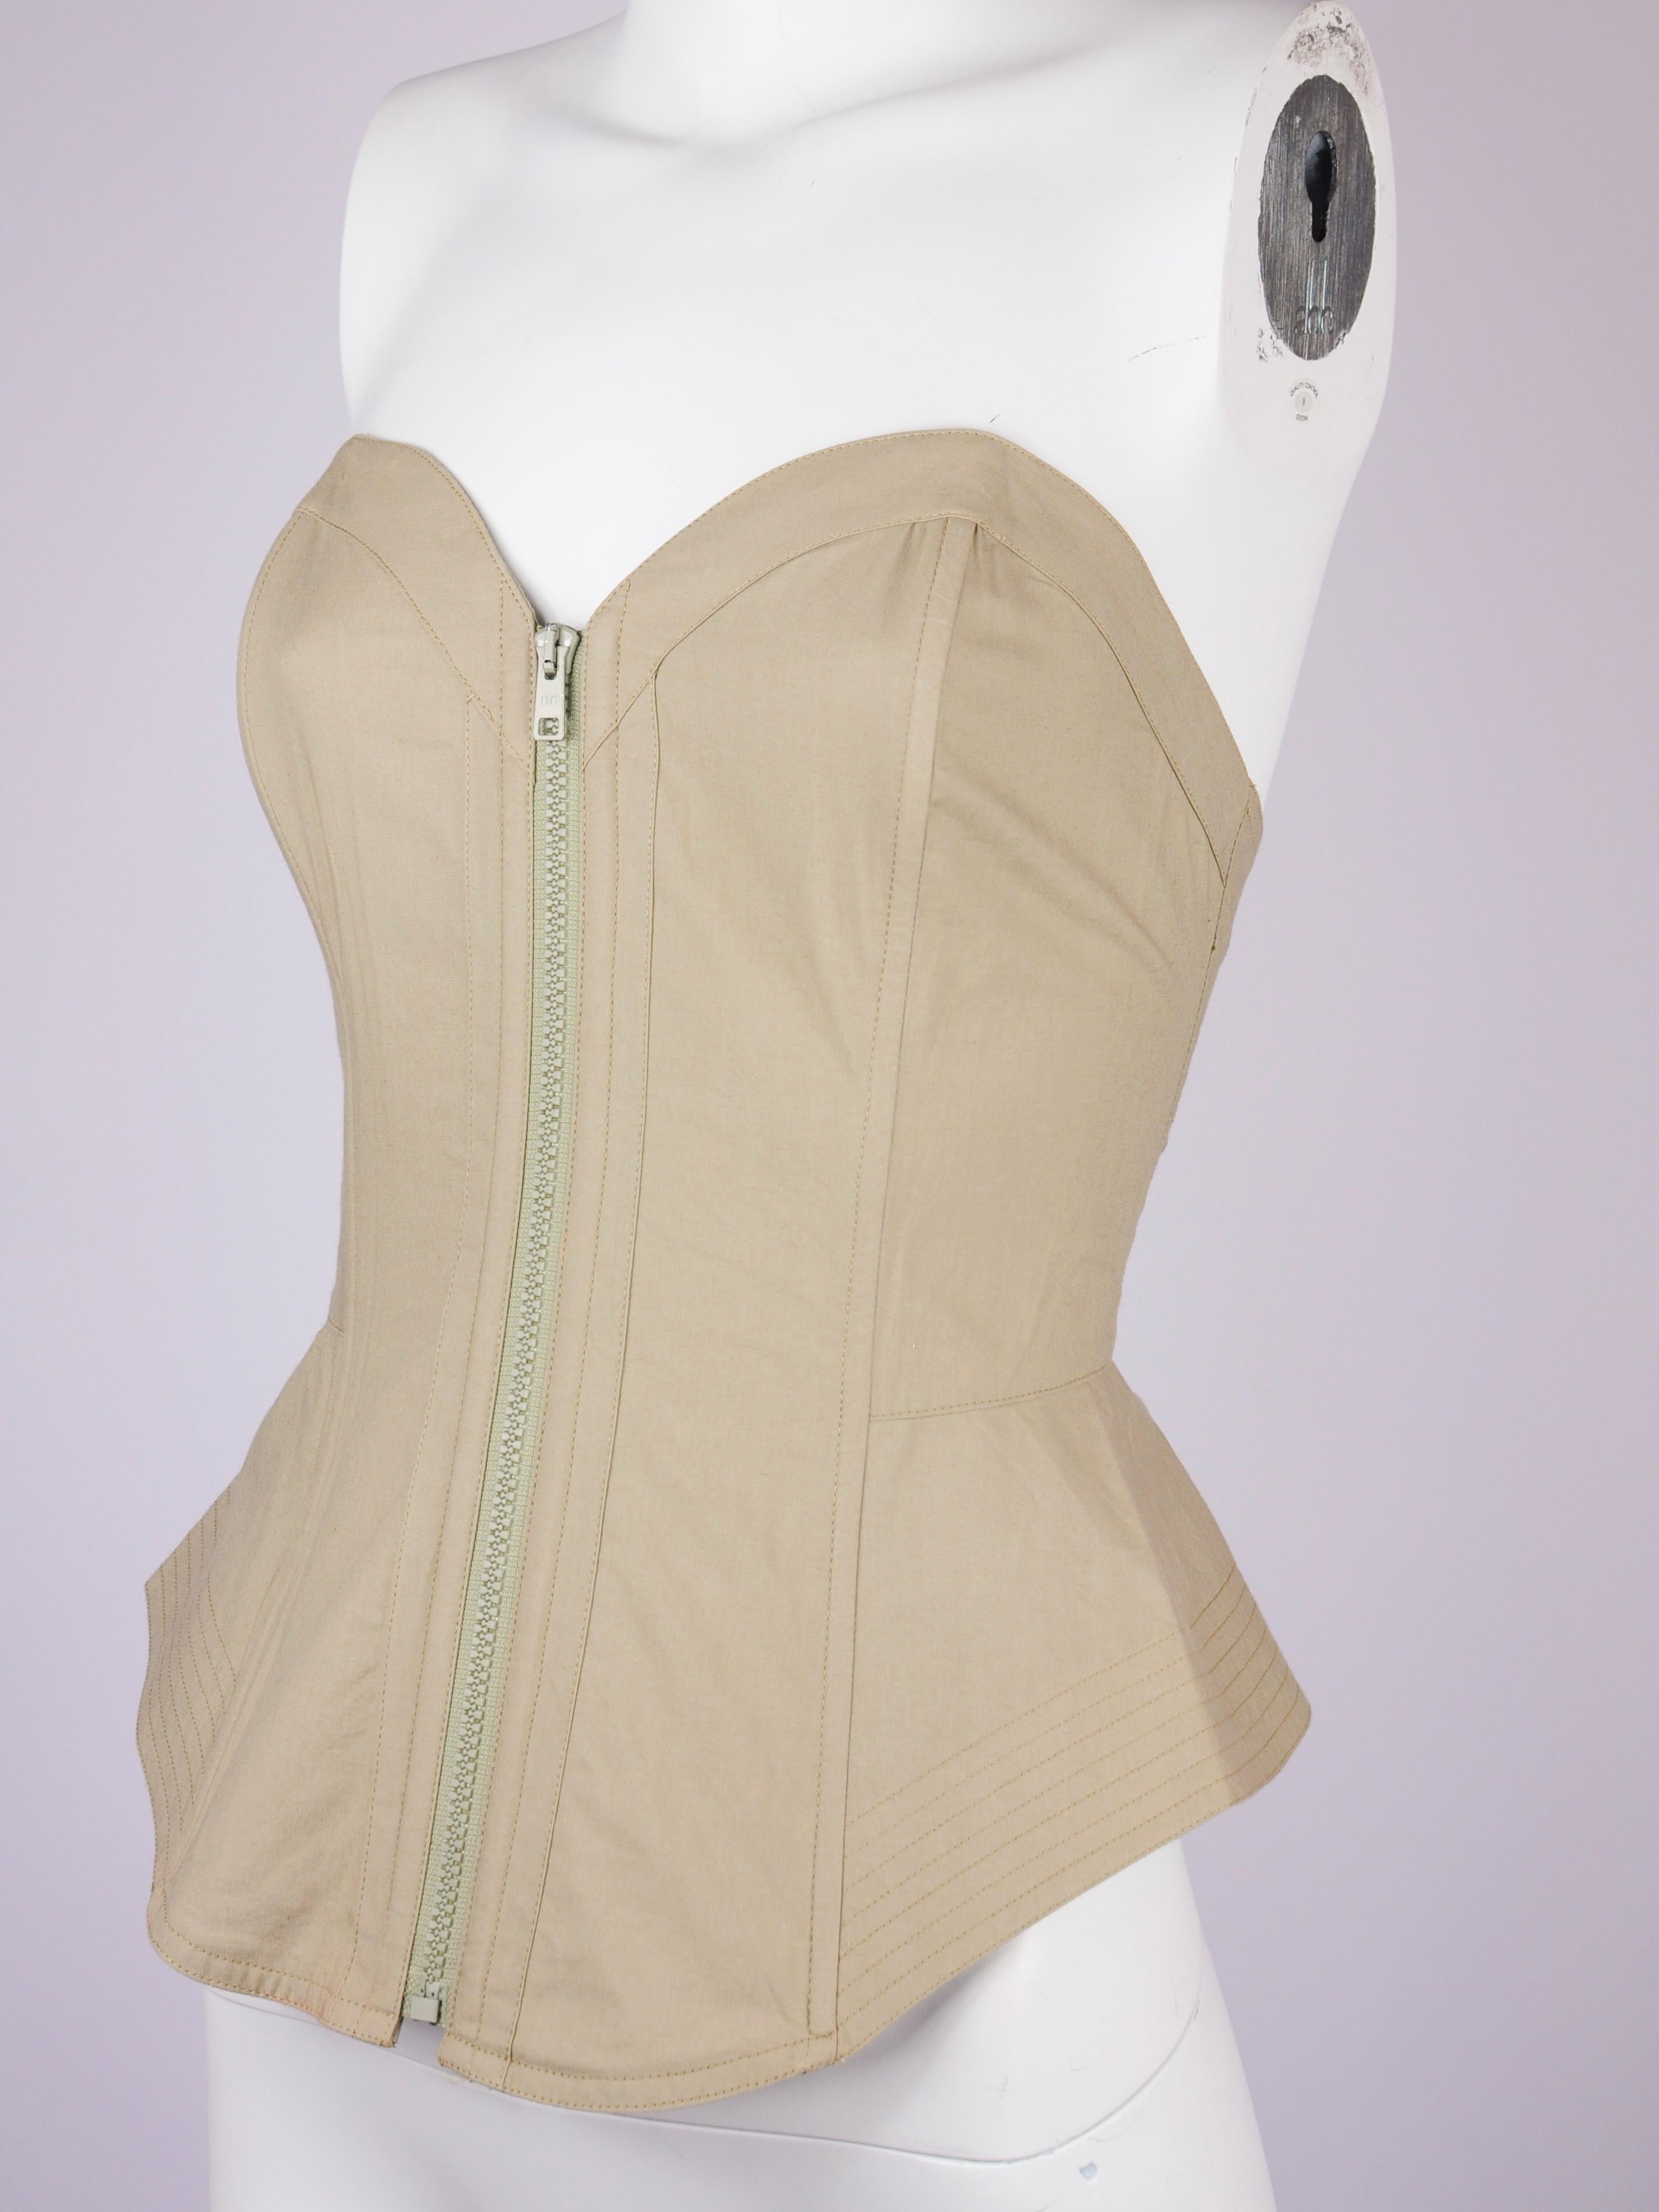 La Perla corset top in beige cotton from the early 1990s. This La Perla corset is deadstock, meaning it is new with tags and has never been worn before. It is reinforced with boning and features an elastic panel on the back to make it hug your body